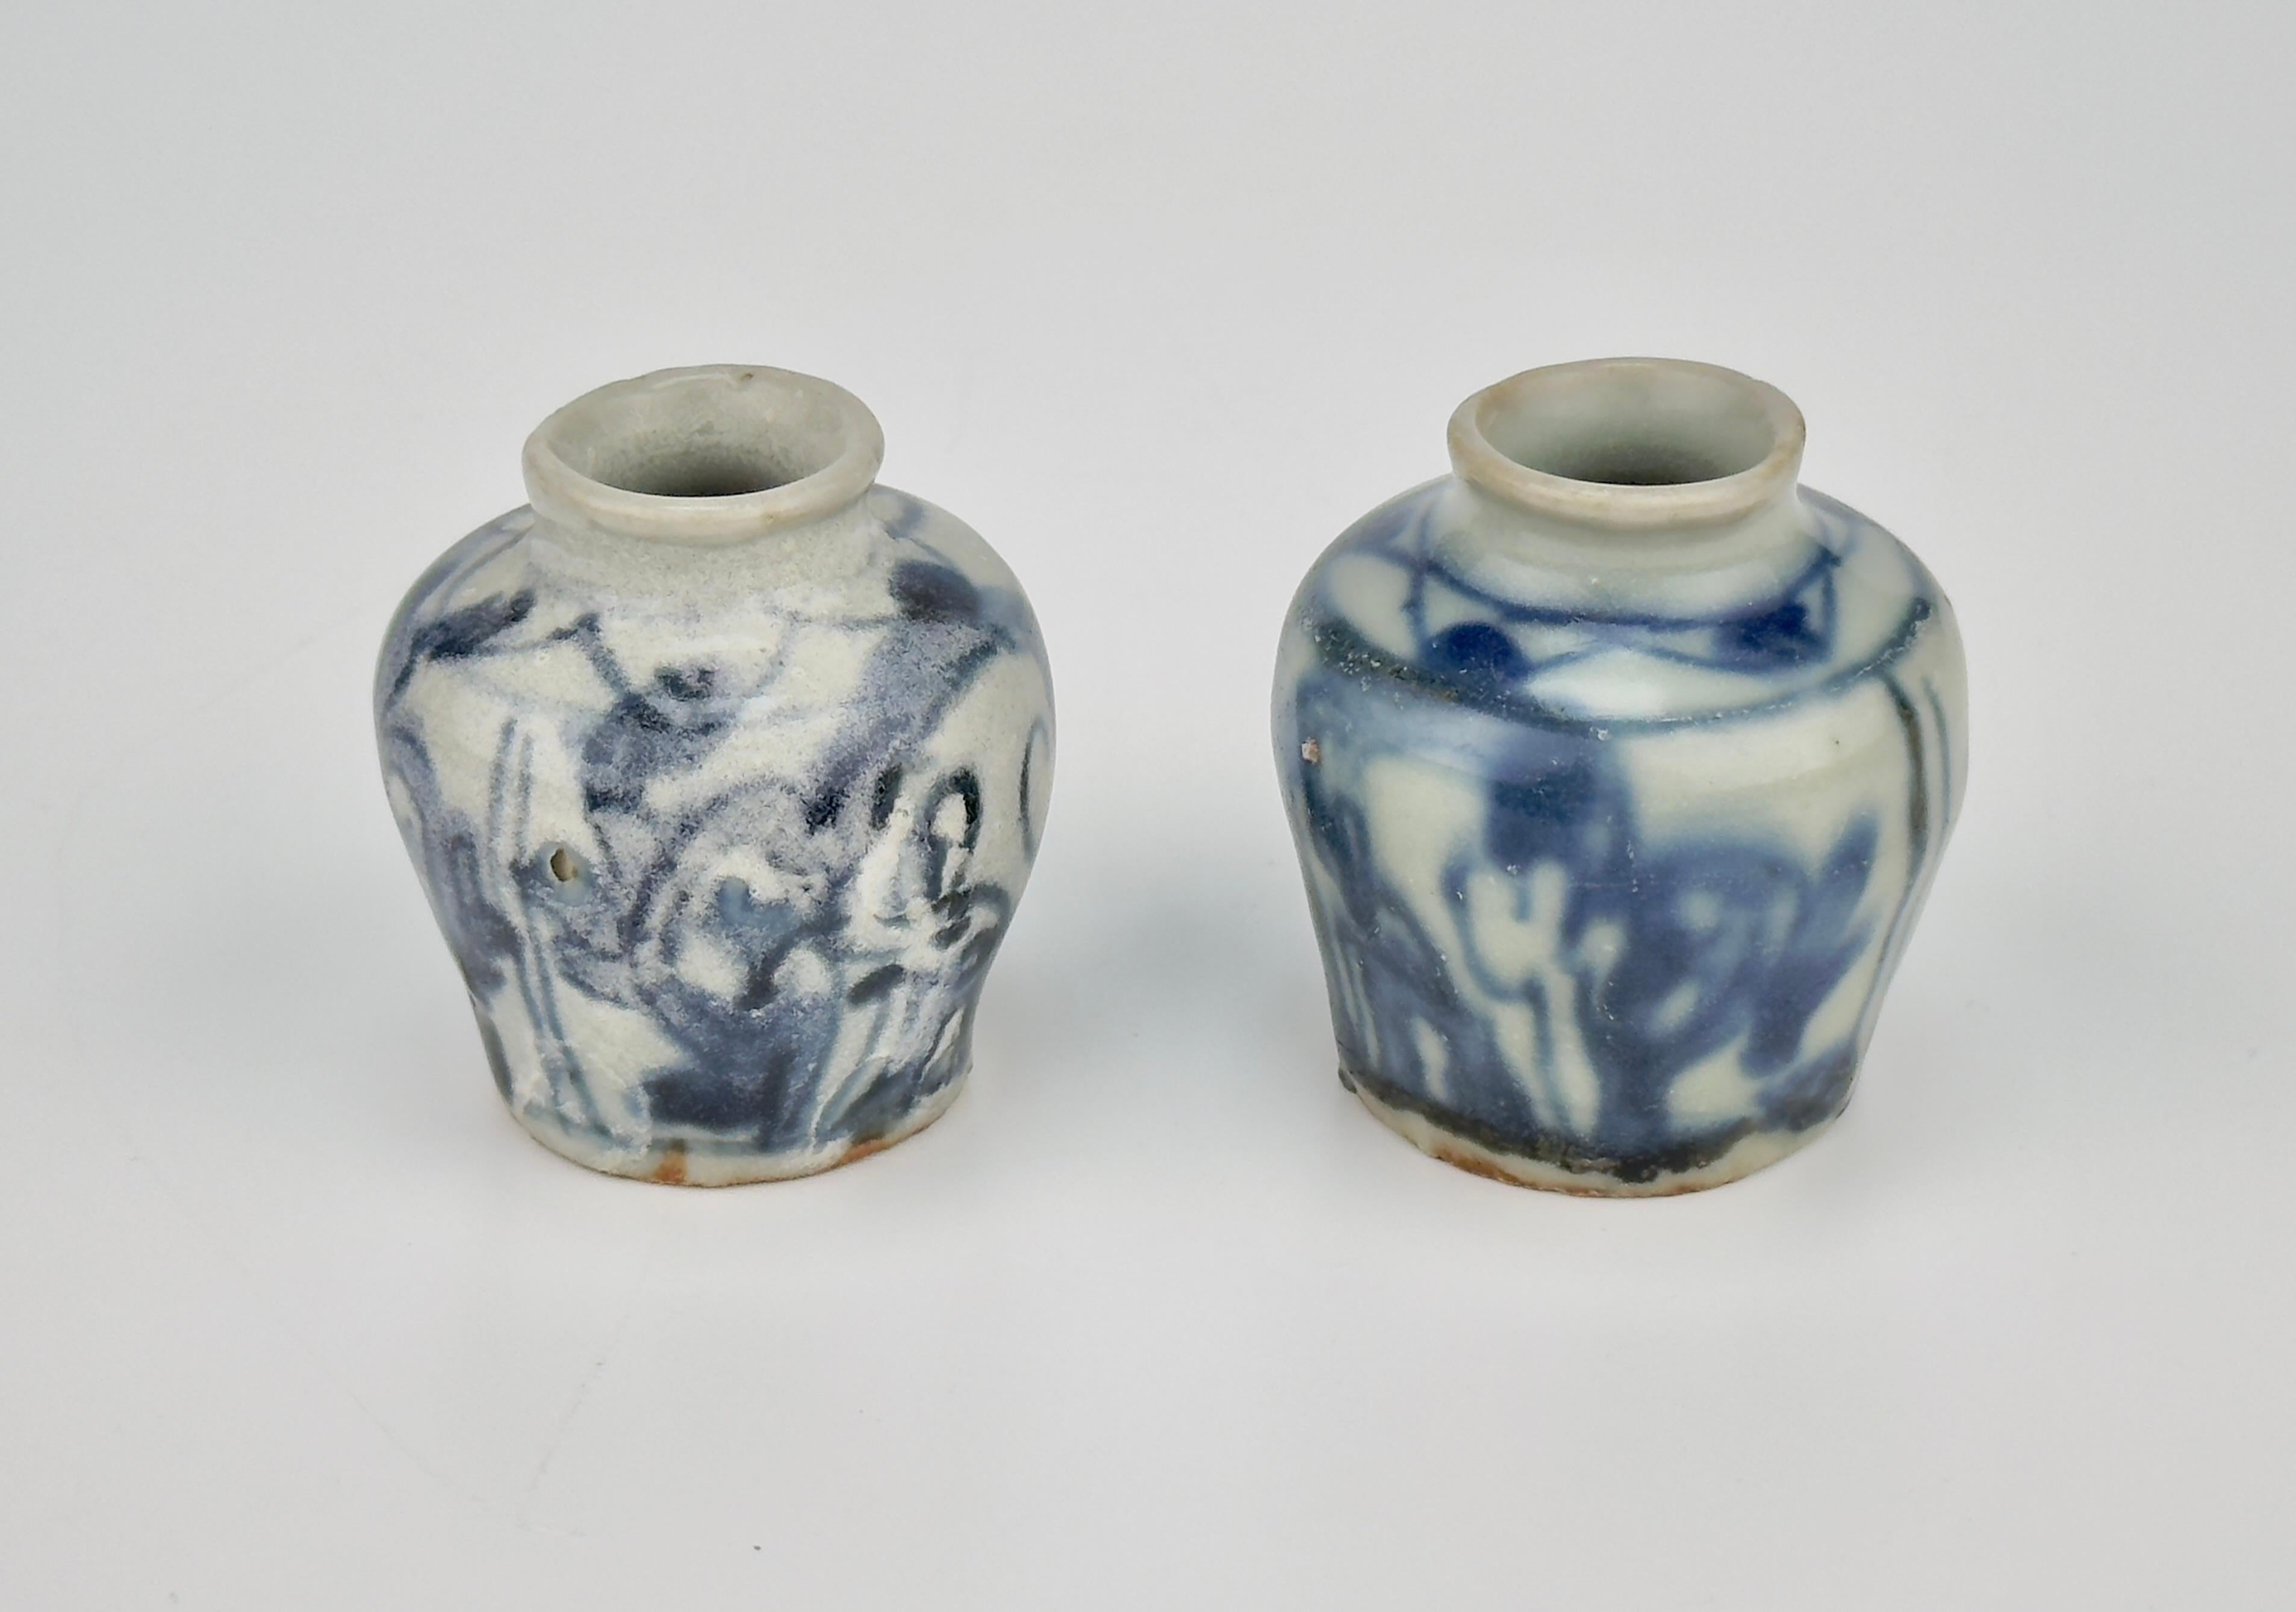 Glazed Pair of Small Jarlet with arabesque design, Late Ming Era(16-17th century) For Sale